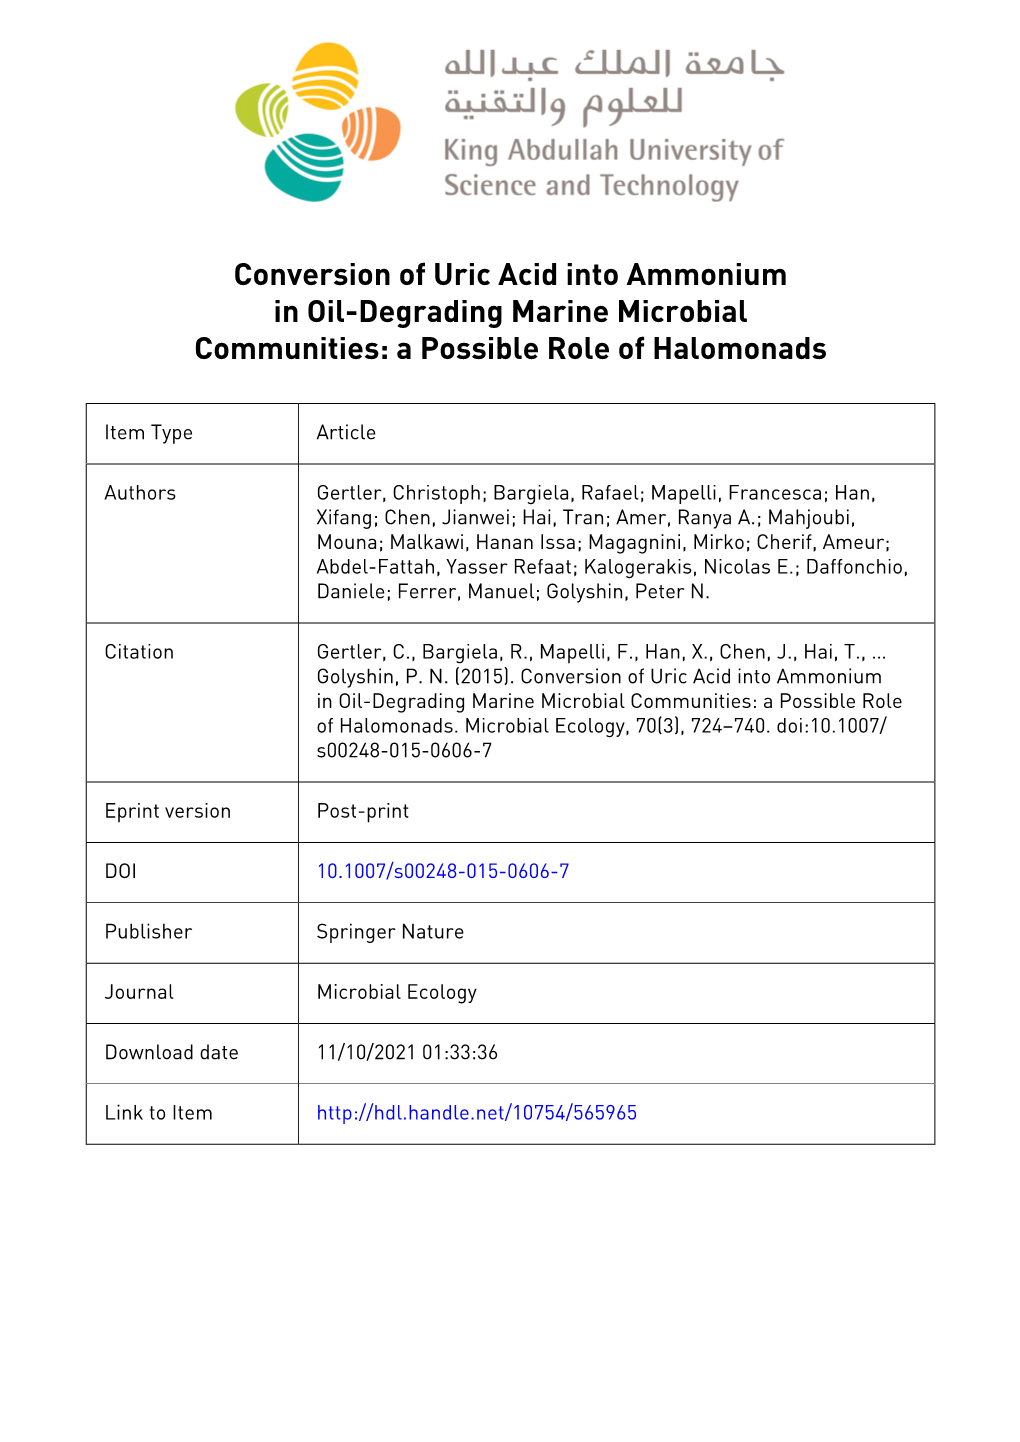 Conversion of Uric Acid Into Ammonium in Oil-Degrading Marine Microbial Communities: a Possible Role of Halomonads